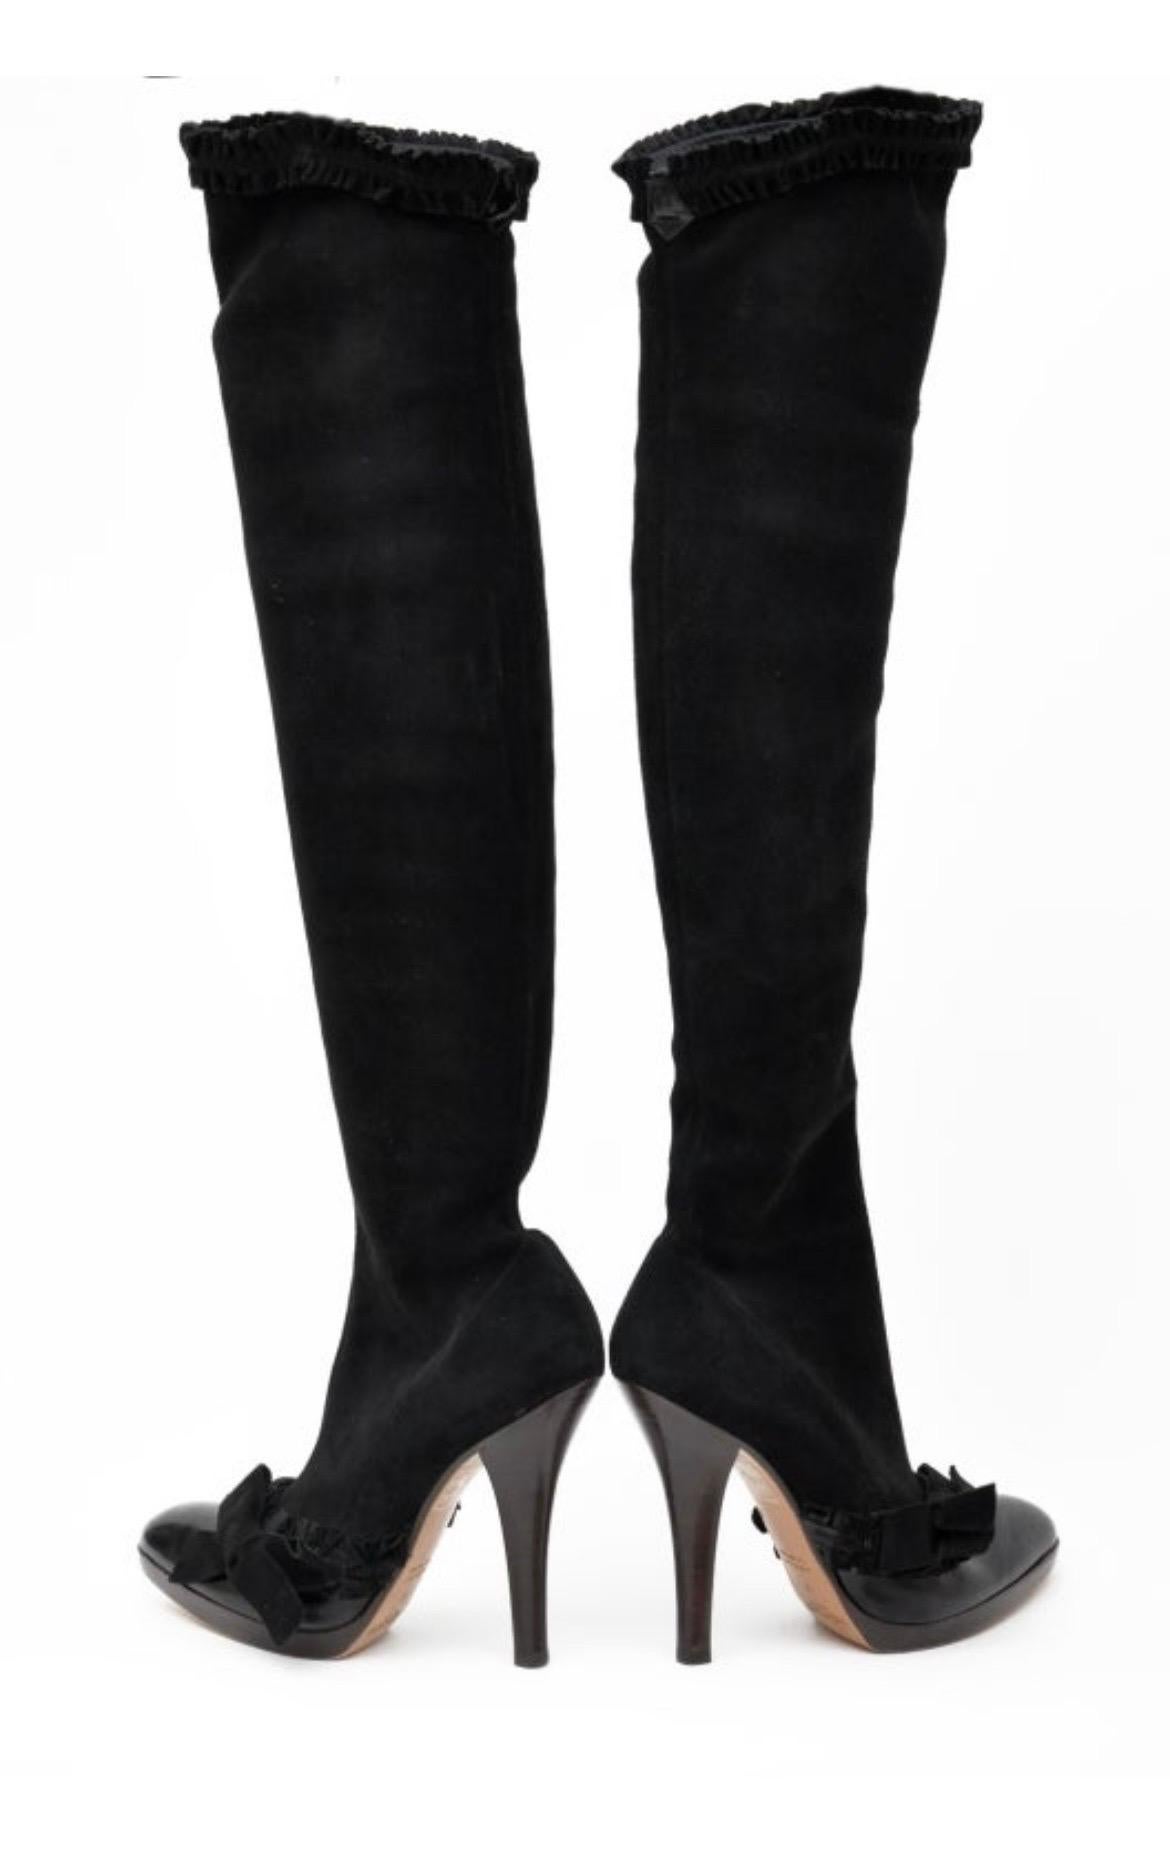 A/W 2001 Tom Ford for Yves Saint Laurent Black Suede Over the Knee Boots 37 - 7 In Excellent Condition For Sale In Montgomery, TX